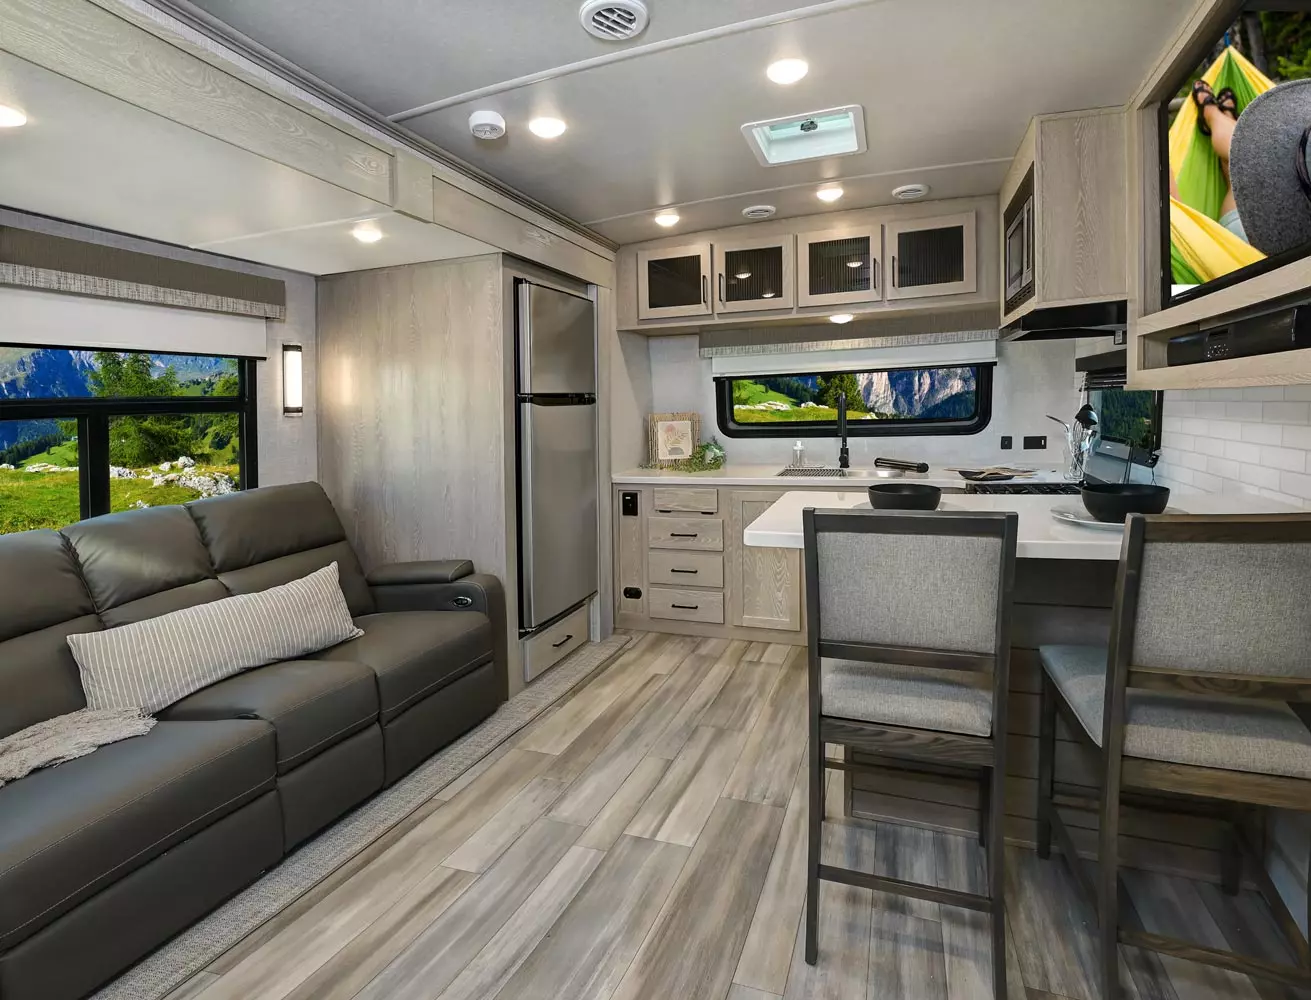 Flagstaff Classic Travel Trailers Gallery Image